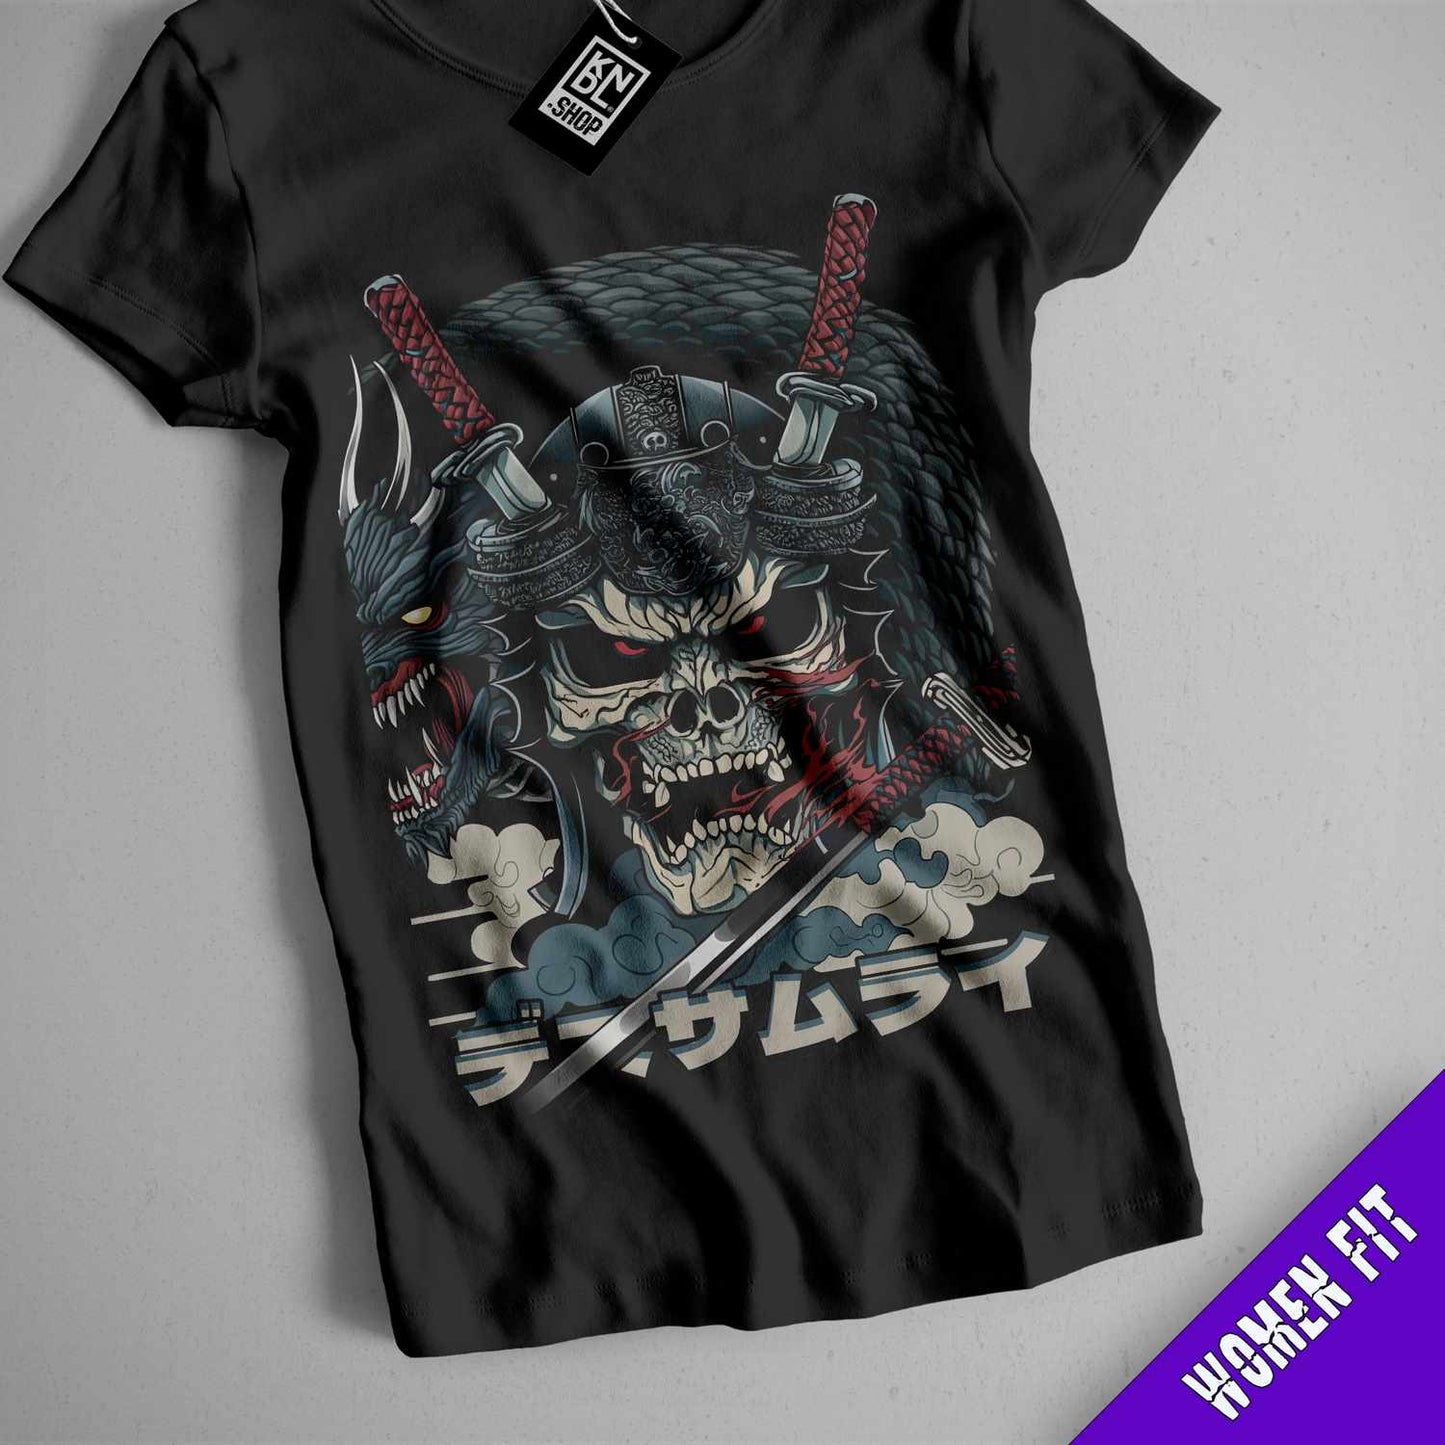 a black tshirt with a skull and swords on it